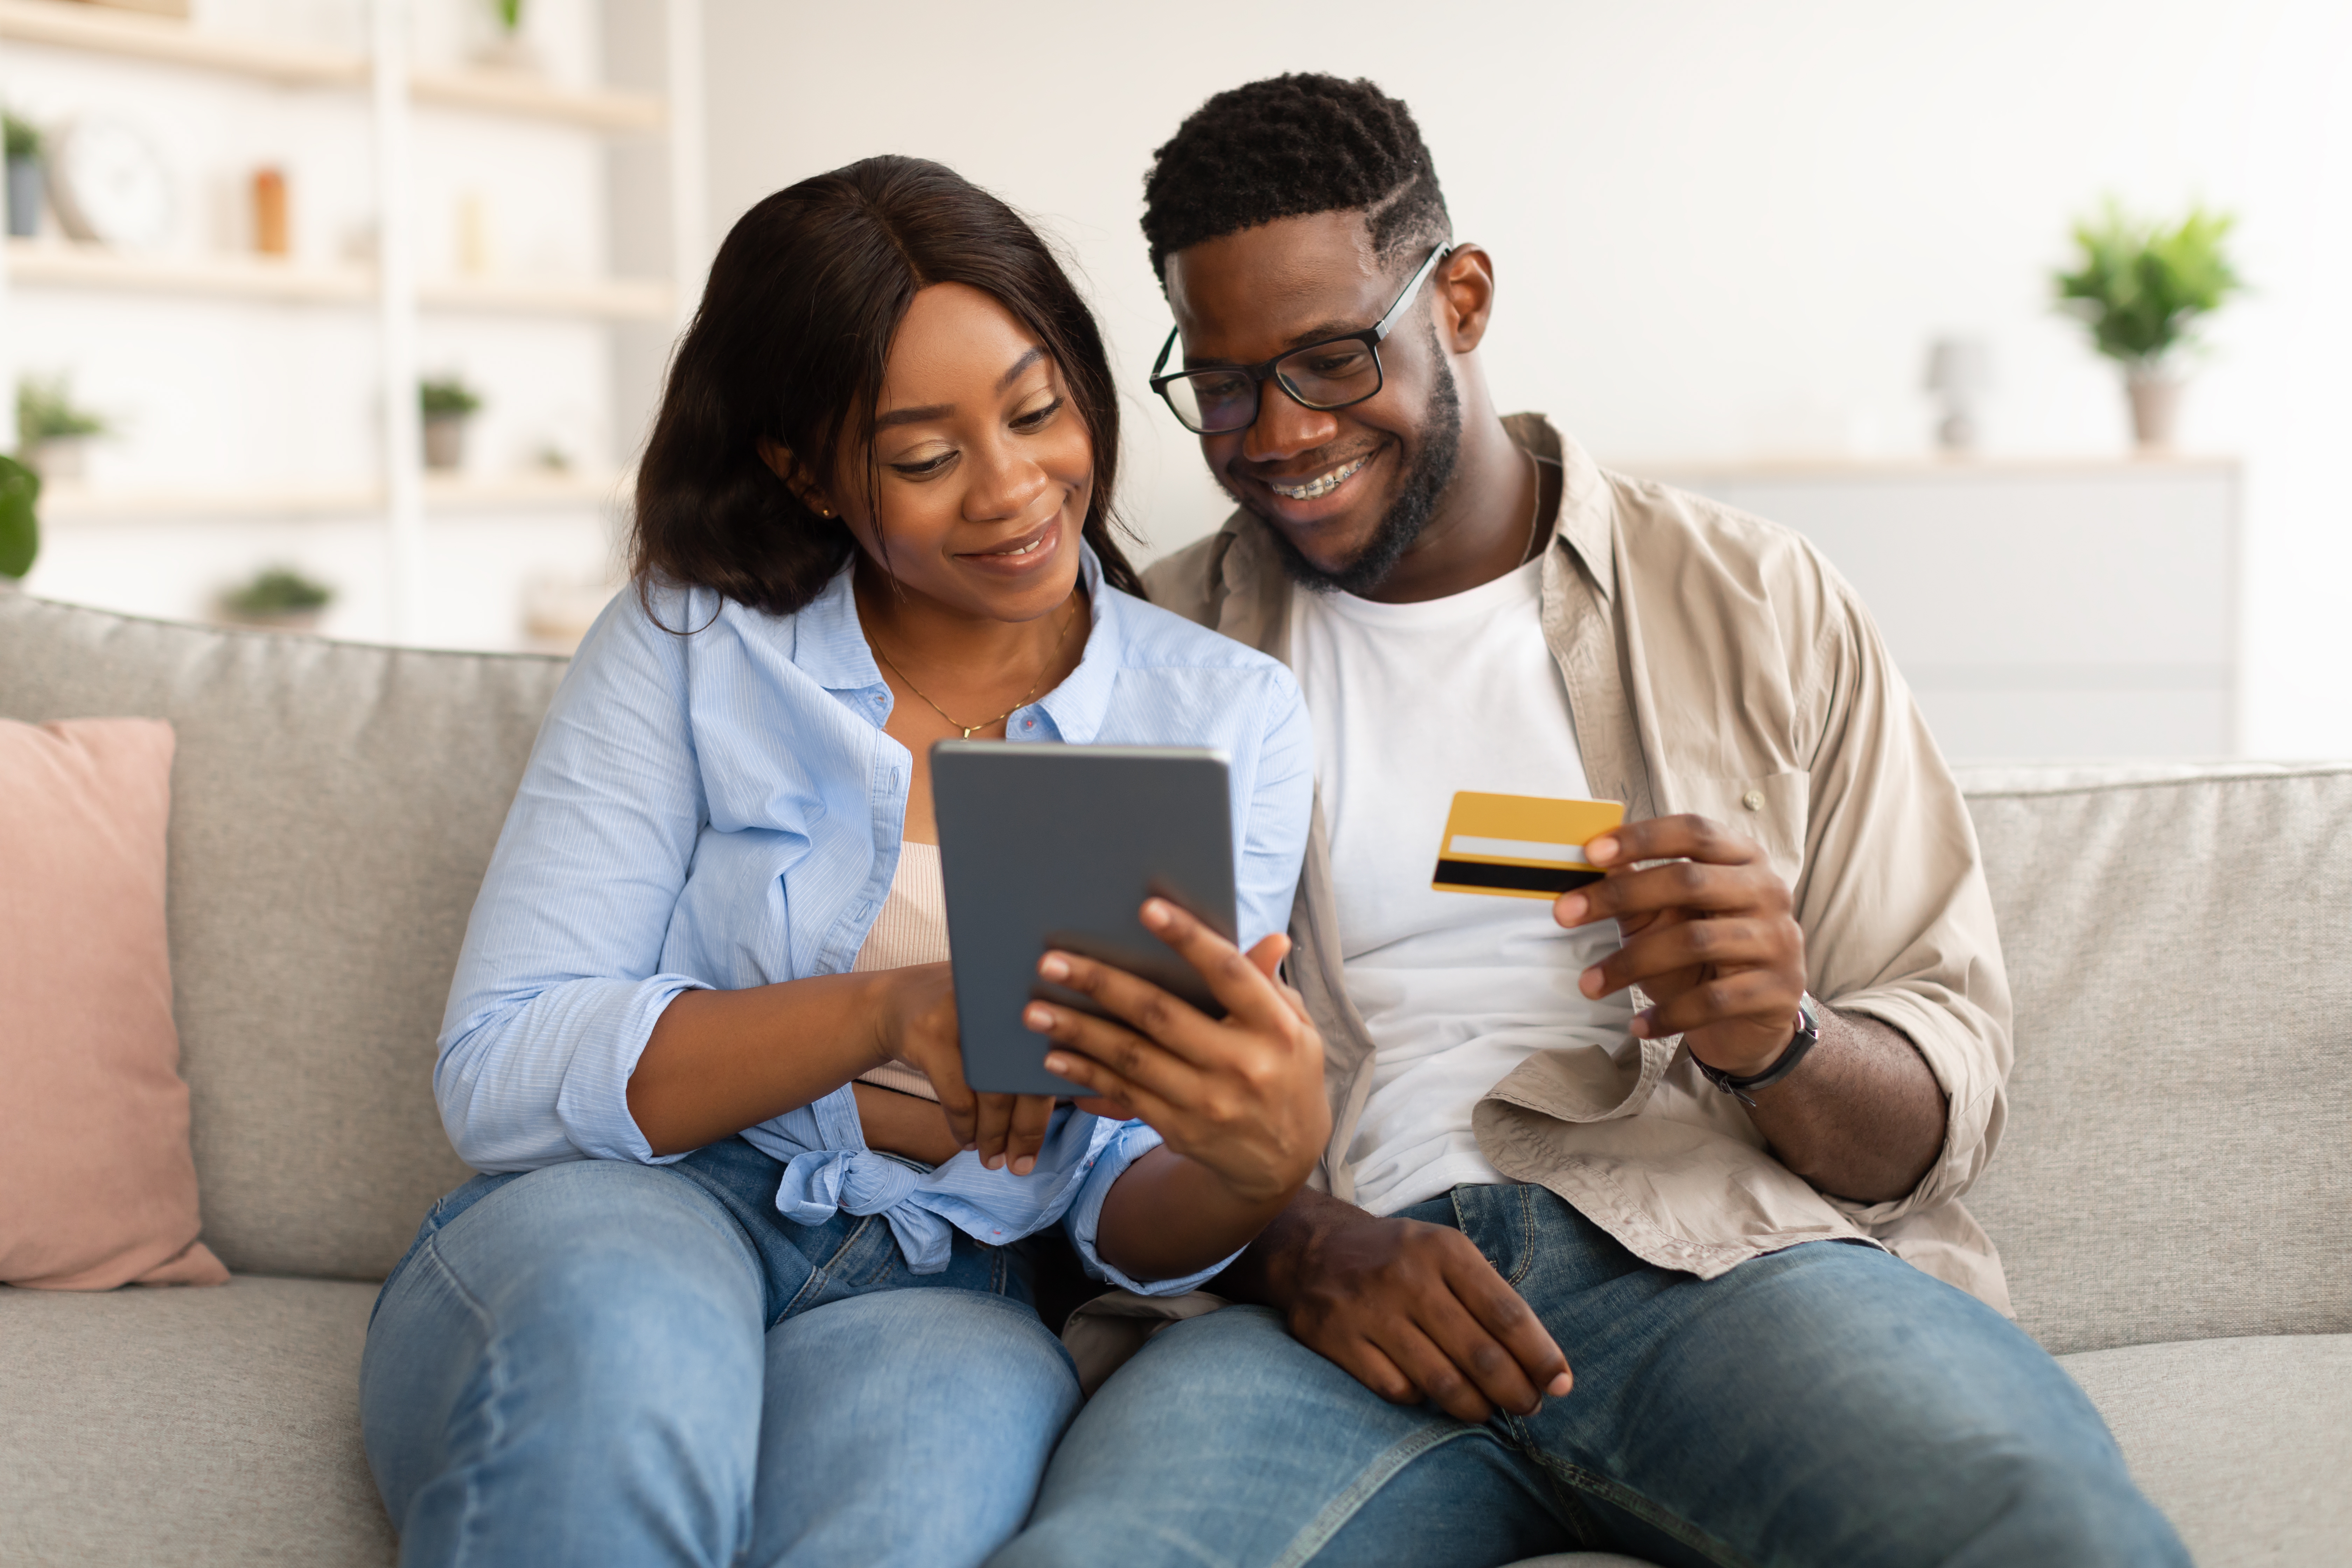 Man and woman sitting on the couch together buying something on a tablet